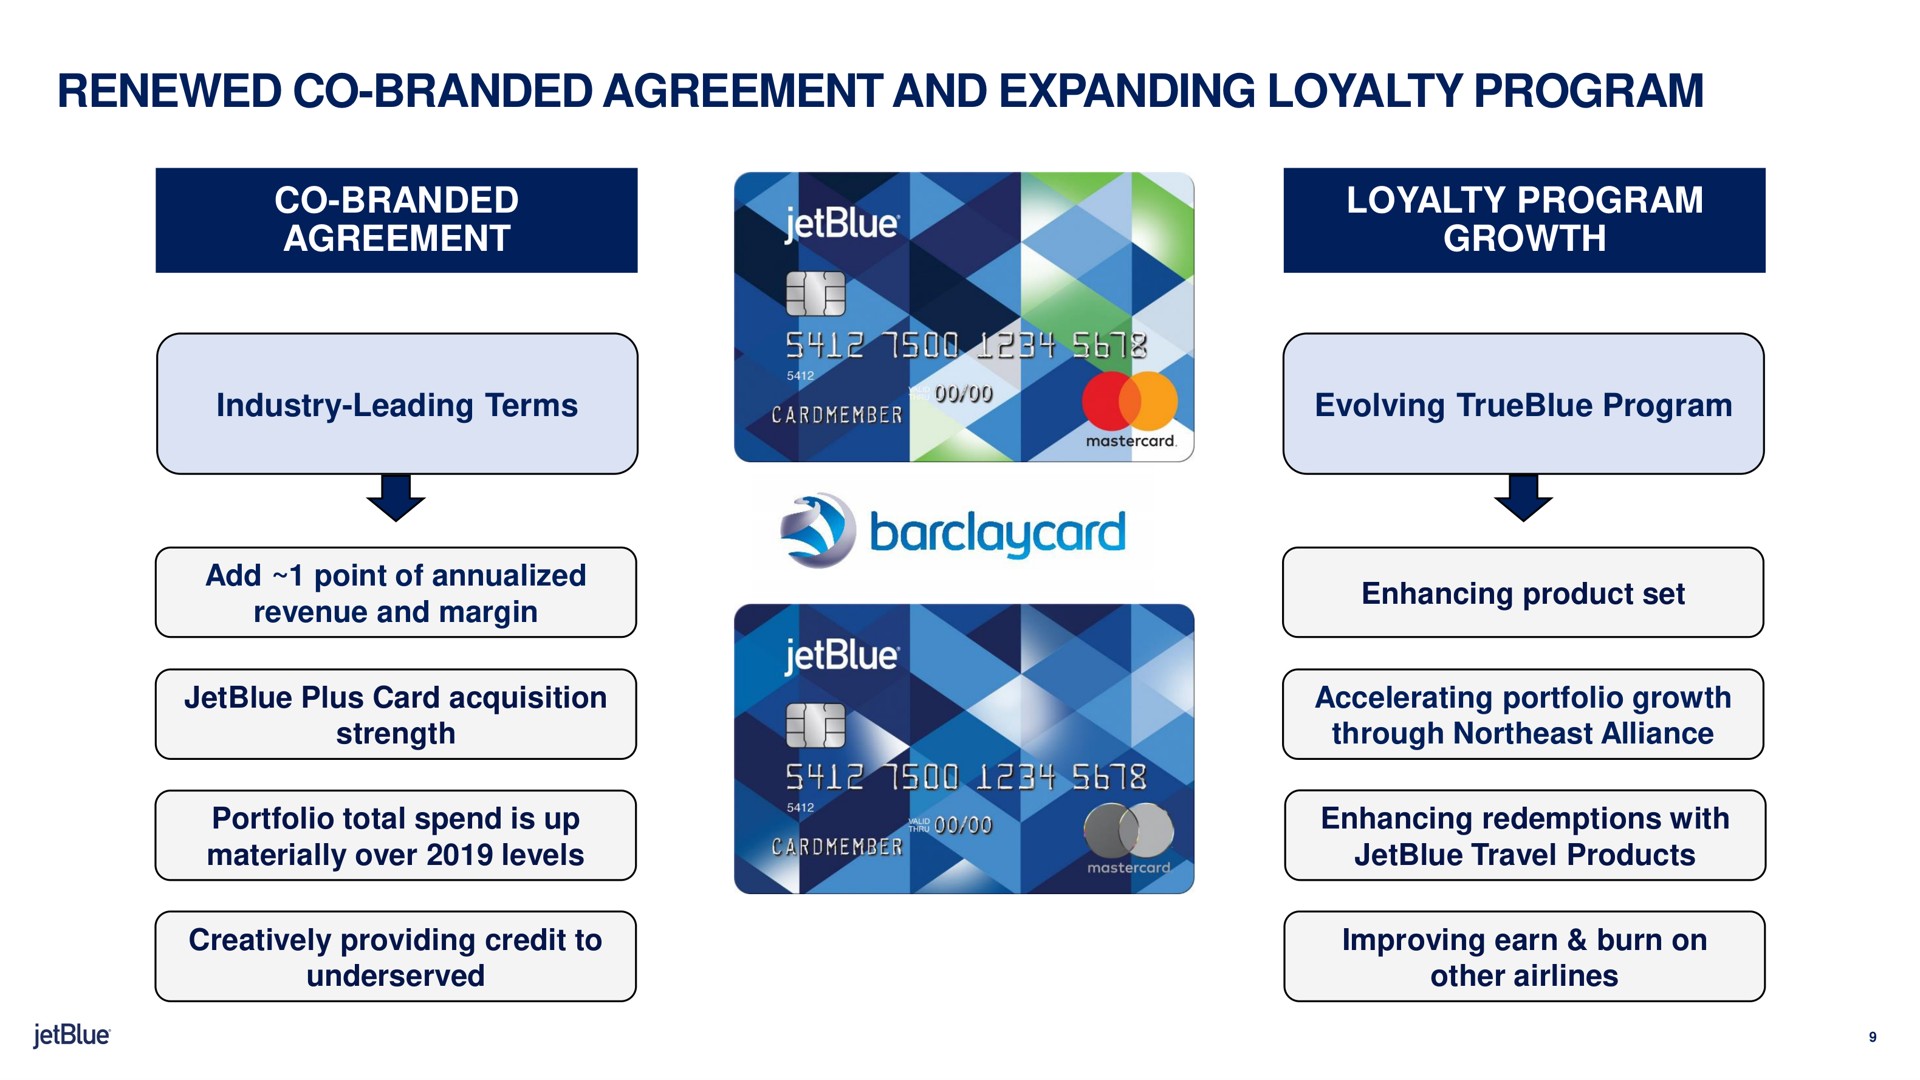 renewed branded agreement and expanding loyalty program branded agreement loyalty program growth strength a my obey sail eerie through northeast alliance enhancing redemptions with travel products | jetBlue